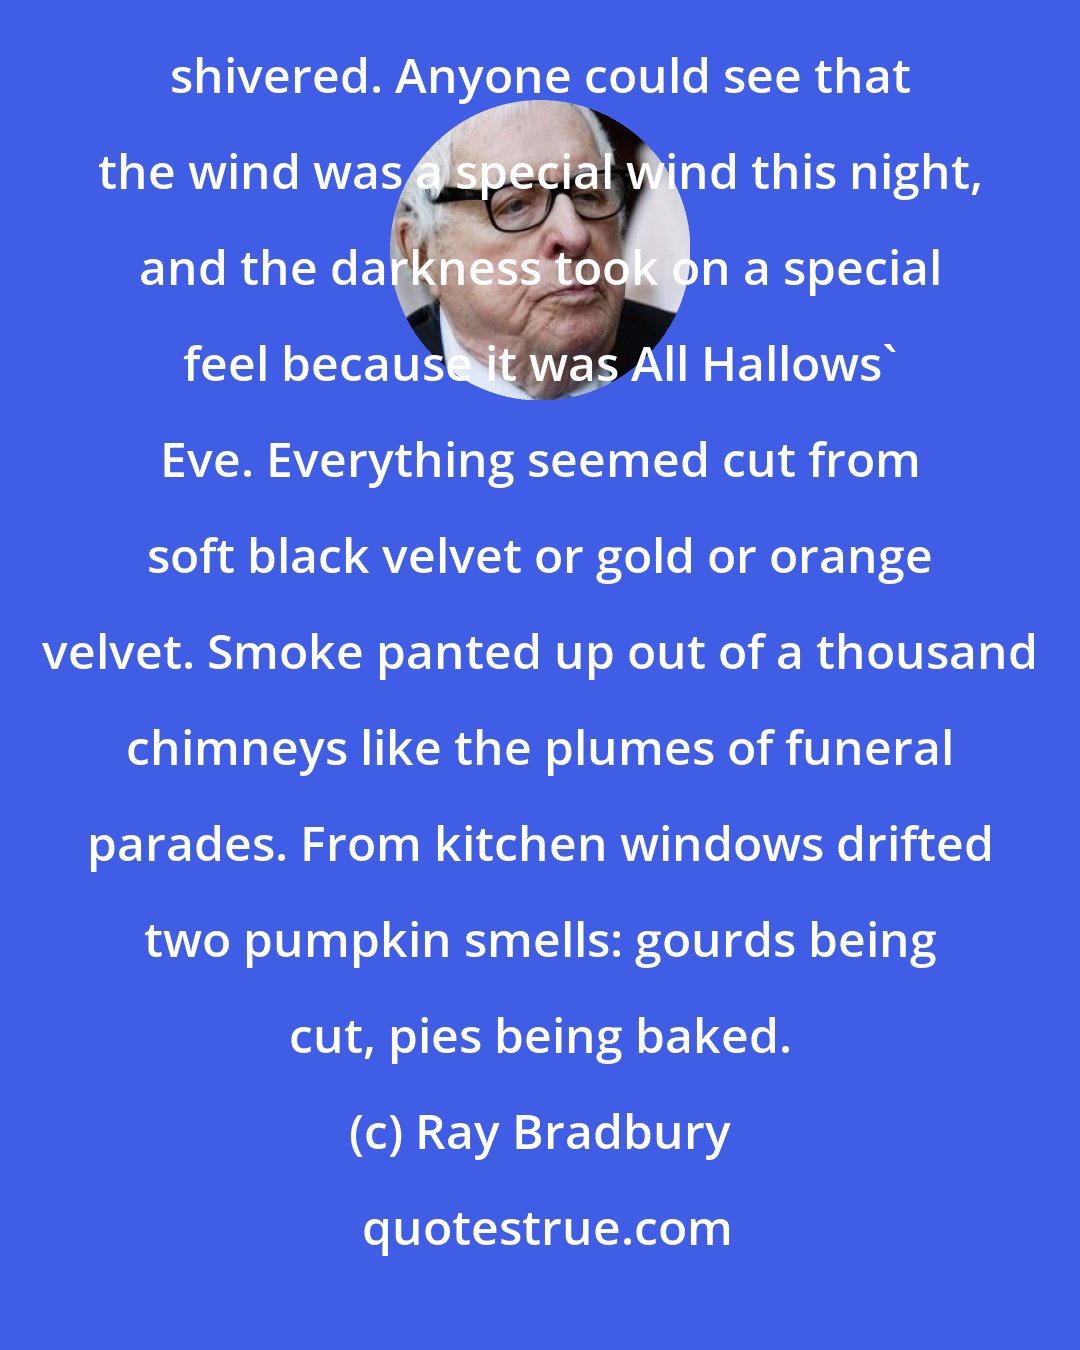 Ray Bradbury: The wind outside nested in each tree, prowled the sidewalks in invisible treads like unseen cats. Tom Skelton shivered. Anyone could see that the wind was a special wind this night, and the darkness took on a special feel because it was All Hallows' Eve. Everything seemed cut from soft black velvet or gold or orange velvet. Smoke panted up out of a thousand chimneys like the plumes of funeral parades. From kitchen windows drifted two pumpkin smells: gourds being cut, pies being baked.